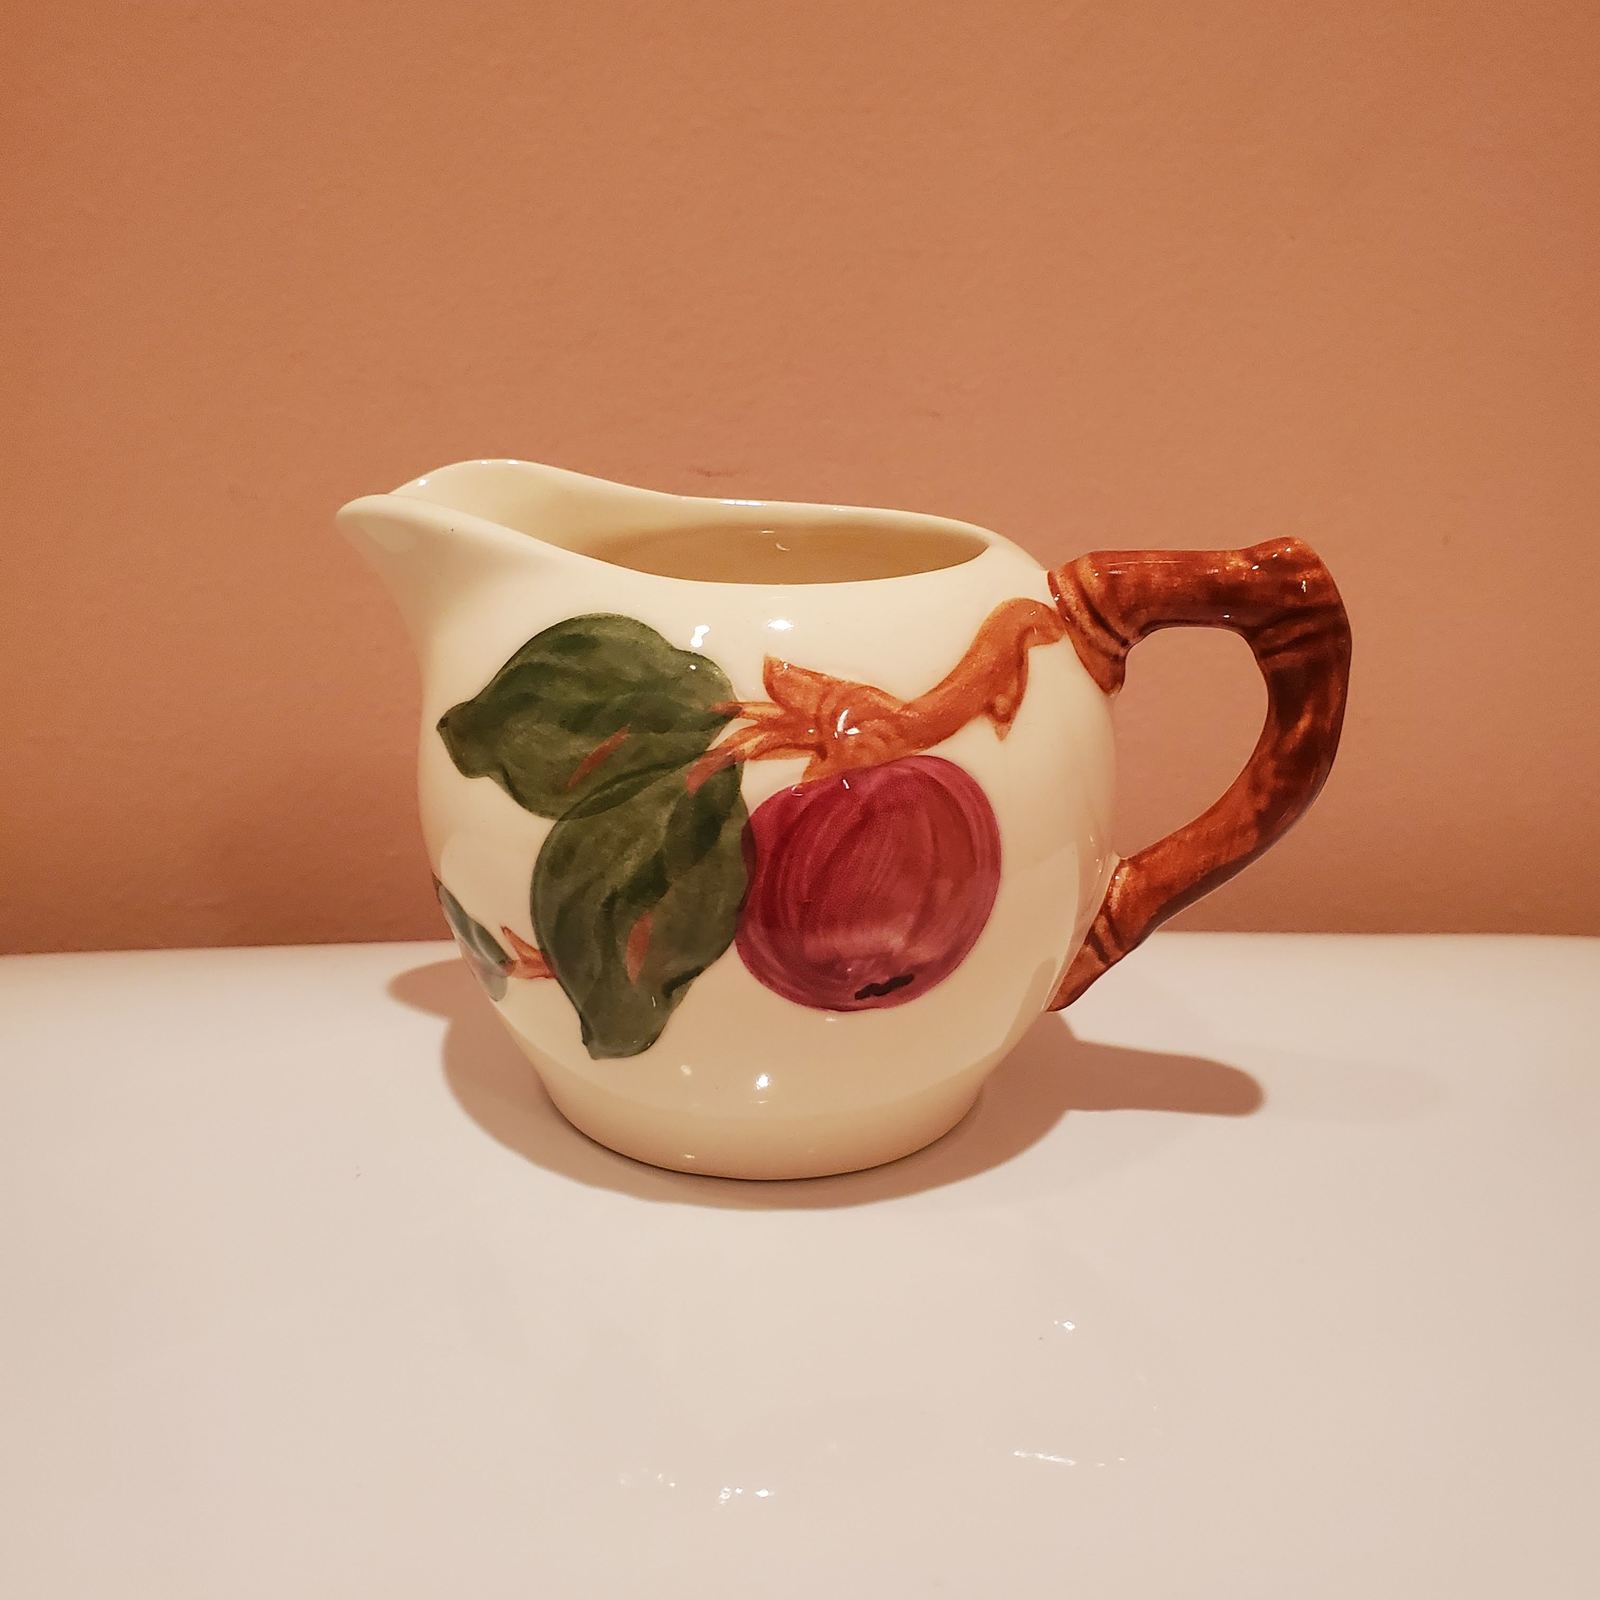 Primary image for Franciscan Apple Creamer, Vintage 1952, Mid Century MCM, Made in USA Pottery